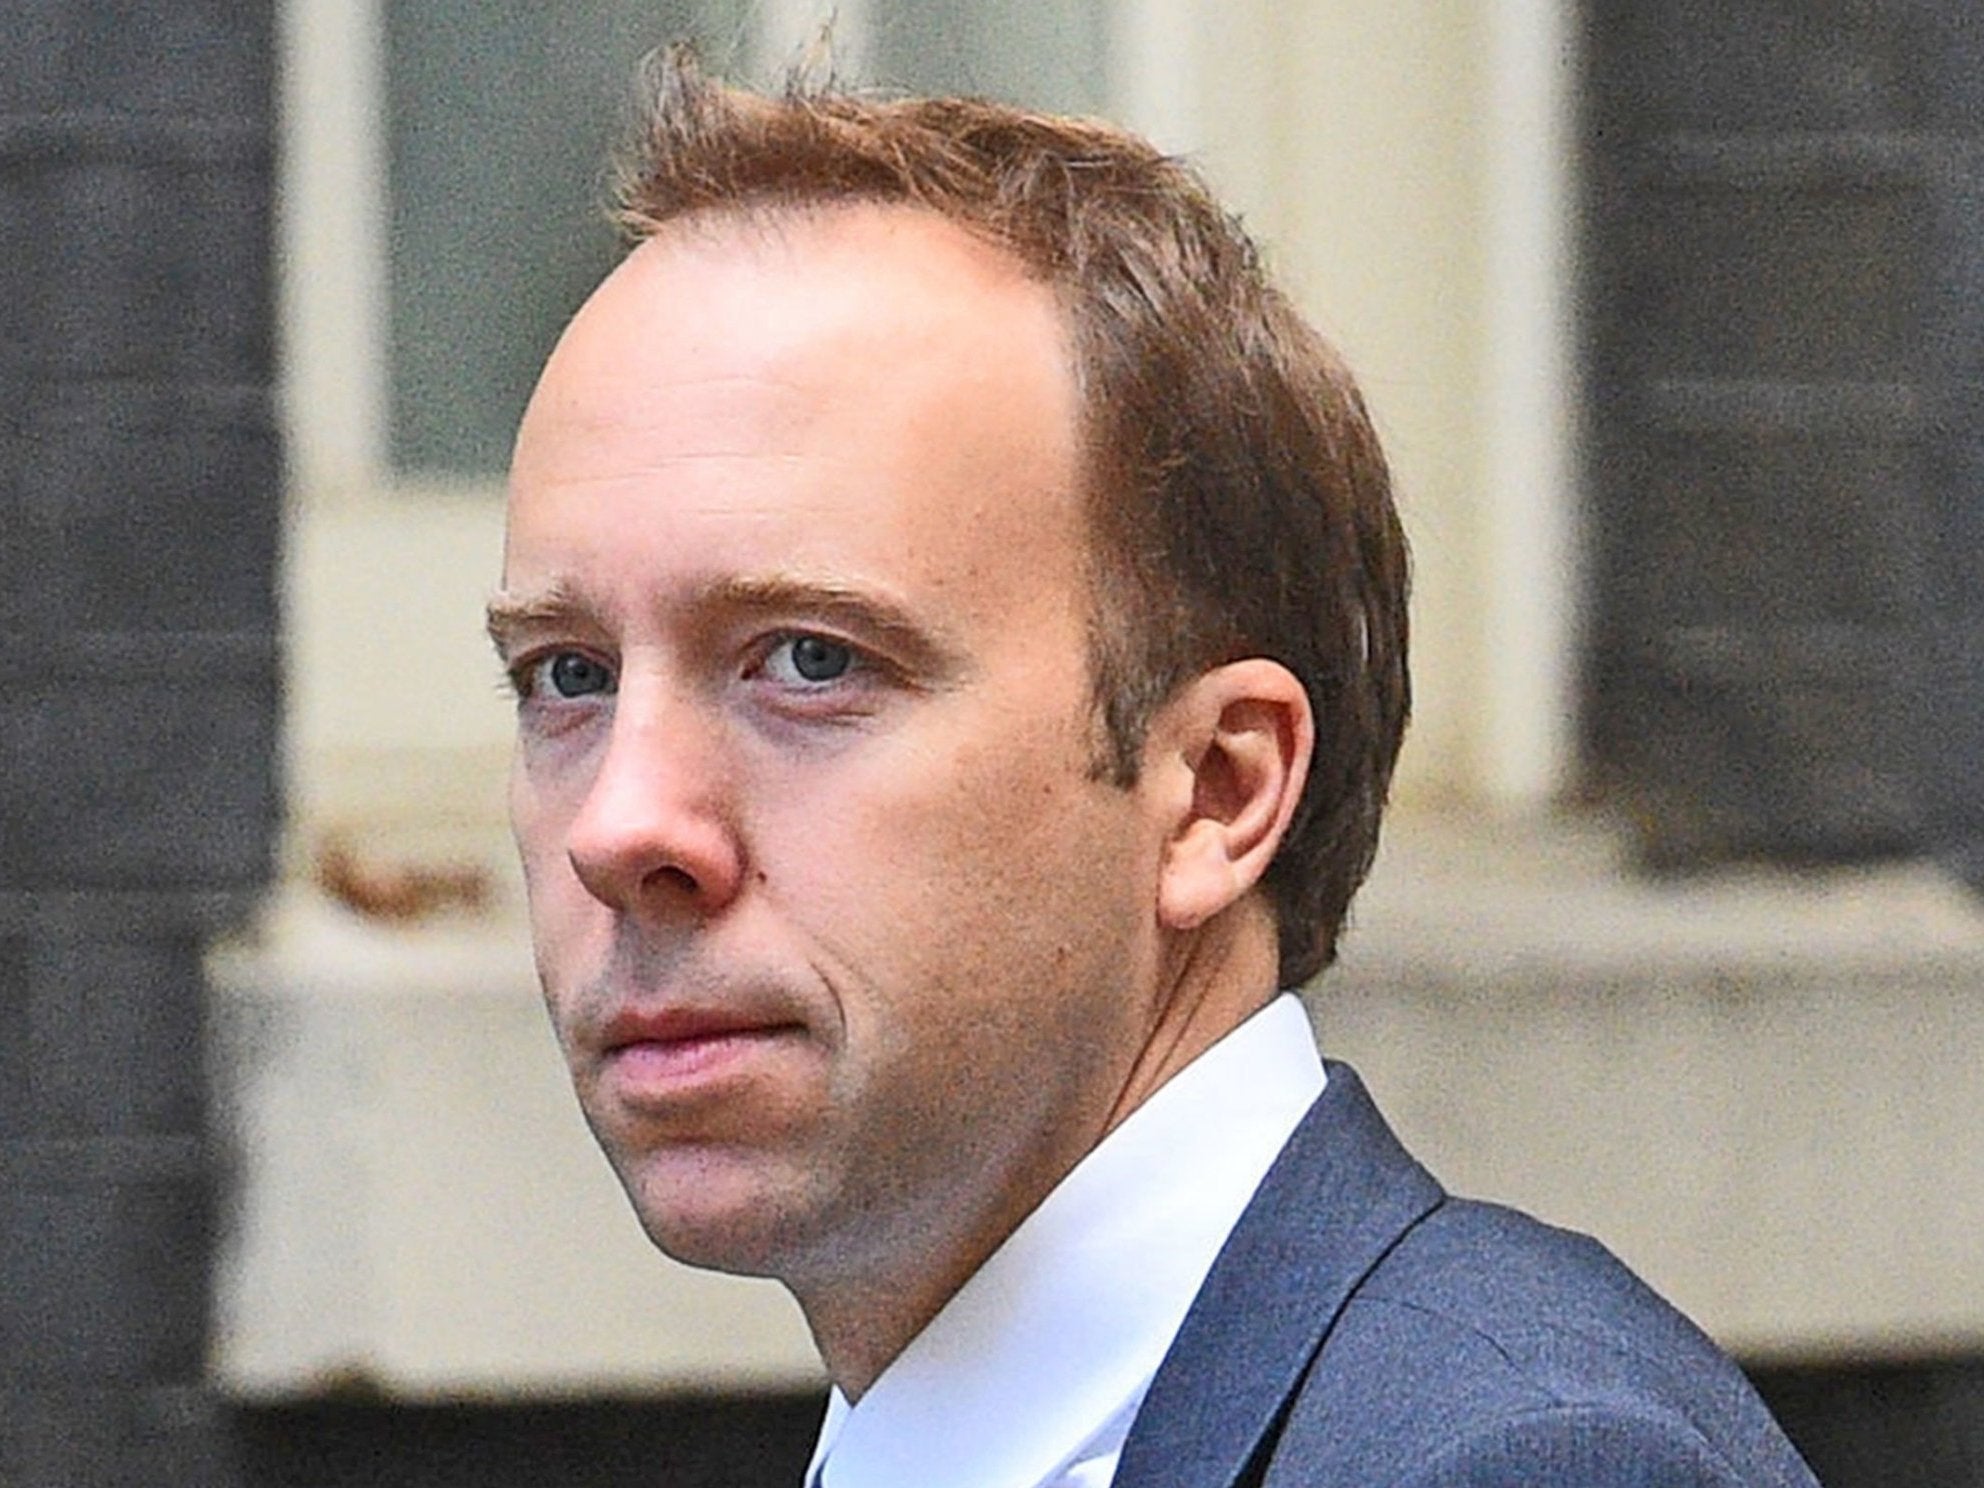 Matt Hancock urged to apologise for 'disgraceful' defence of Boris Johnson over groping allegations